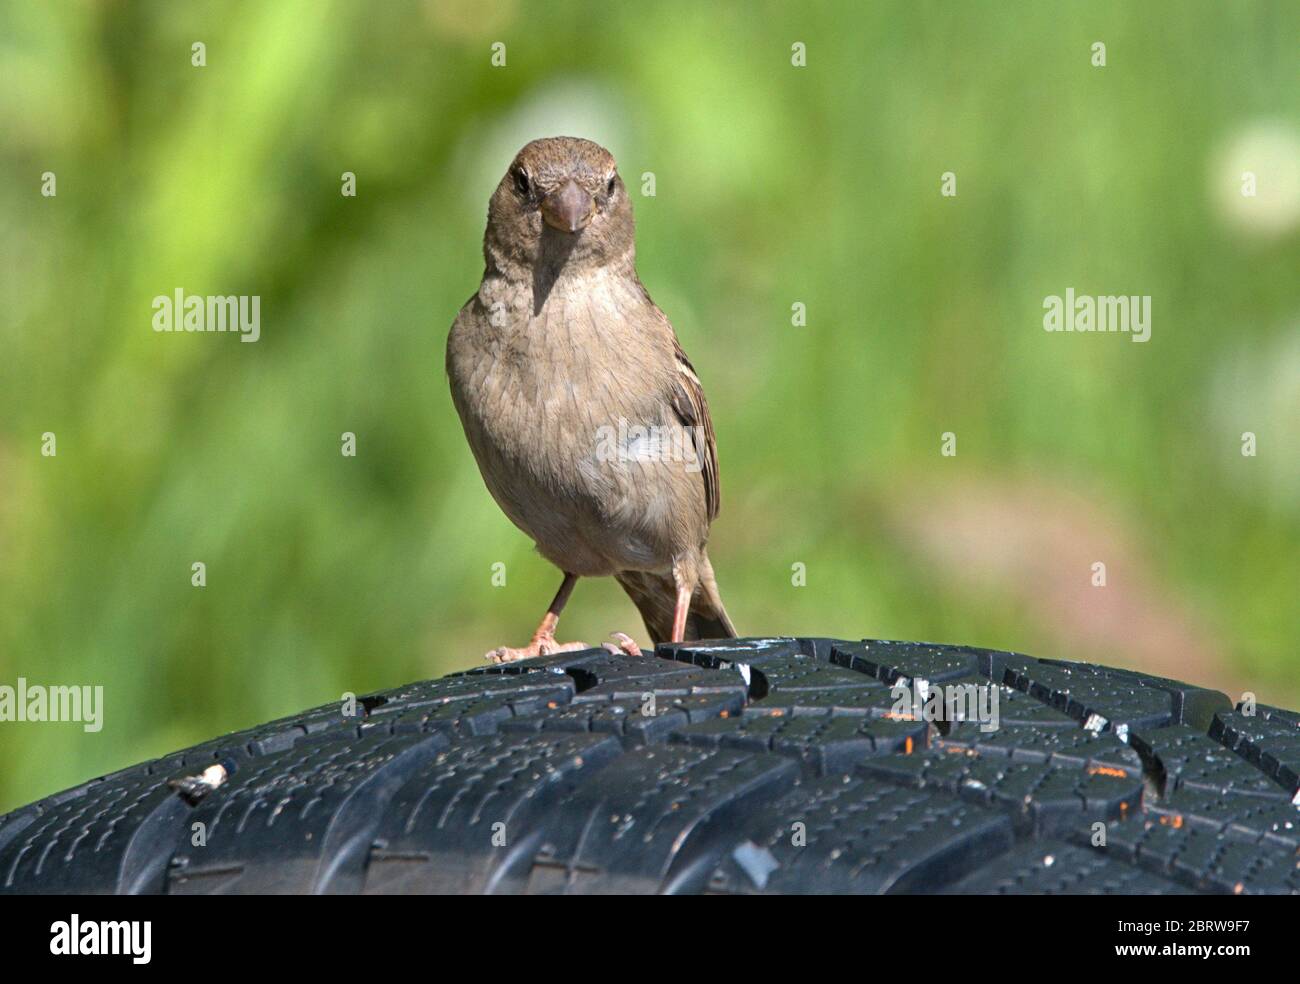 Schleswig, Deutschland. 19th May, 2020. 19.05.2020, Schleswig, a female house sparrow (Passer domesticus) sits on an old car tire. Order: Sparrowbird (Passeriformes), subordination: Songbird (Passeri), superfamily: Passeroidea, family: Sparrow (Passeridae), genus: Passer, species: house sparrow | usage worldwide Credit: dpa/Alamy Live News Stock Photo